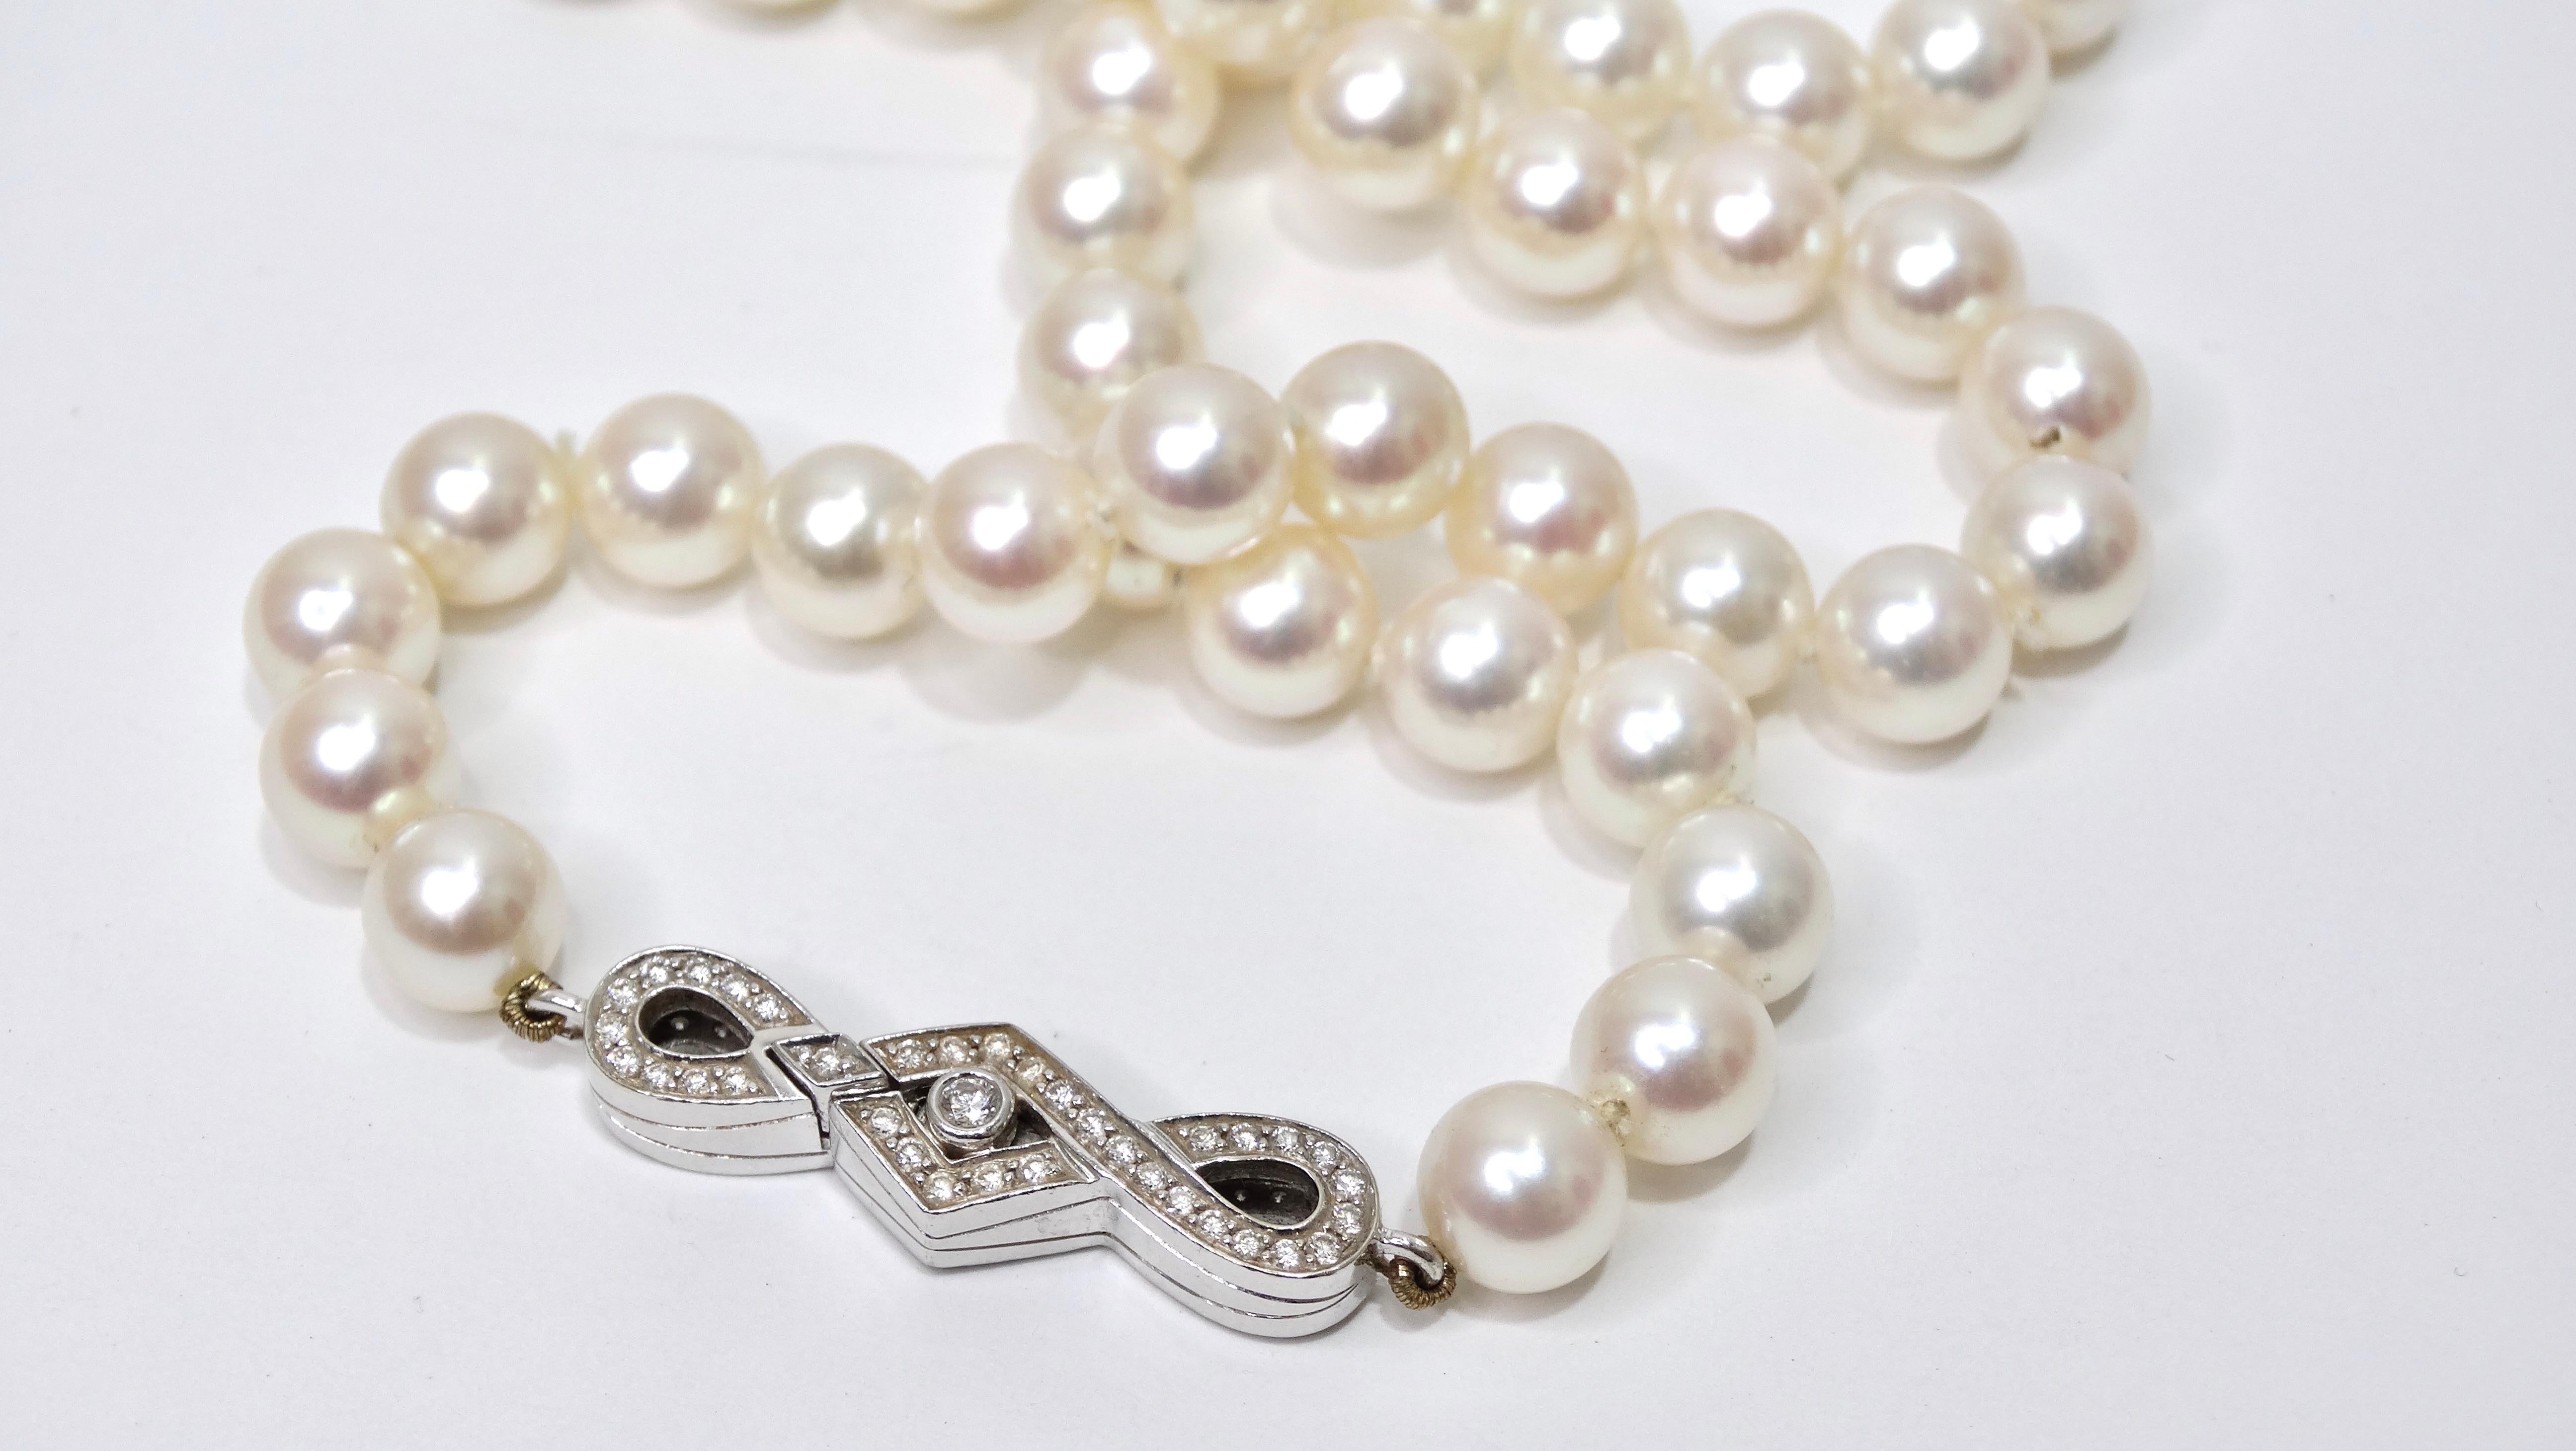 A beautifully made elegant authentic freshwater pearl necklace that anyone can use in their jewelry collection. Pearls are decadent and one of the most coveted materials for jewelry. This necklace is featured in a 18k white gold with a diamond